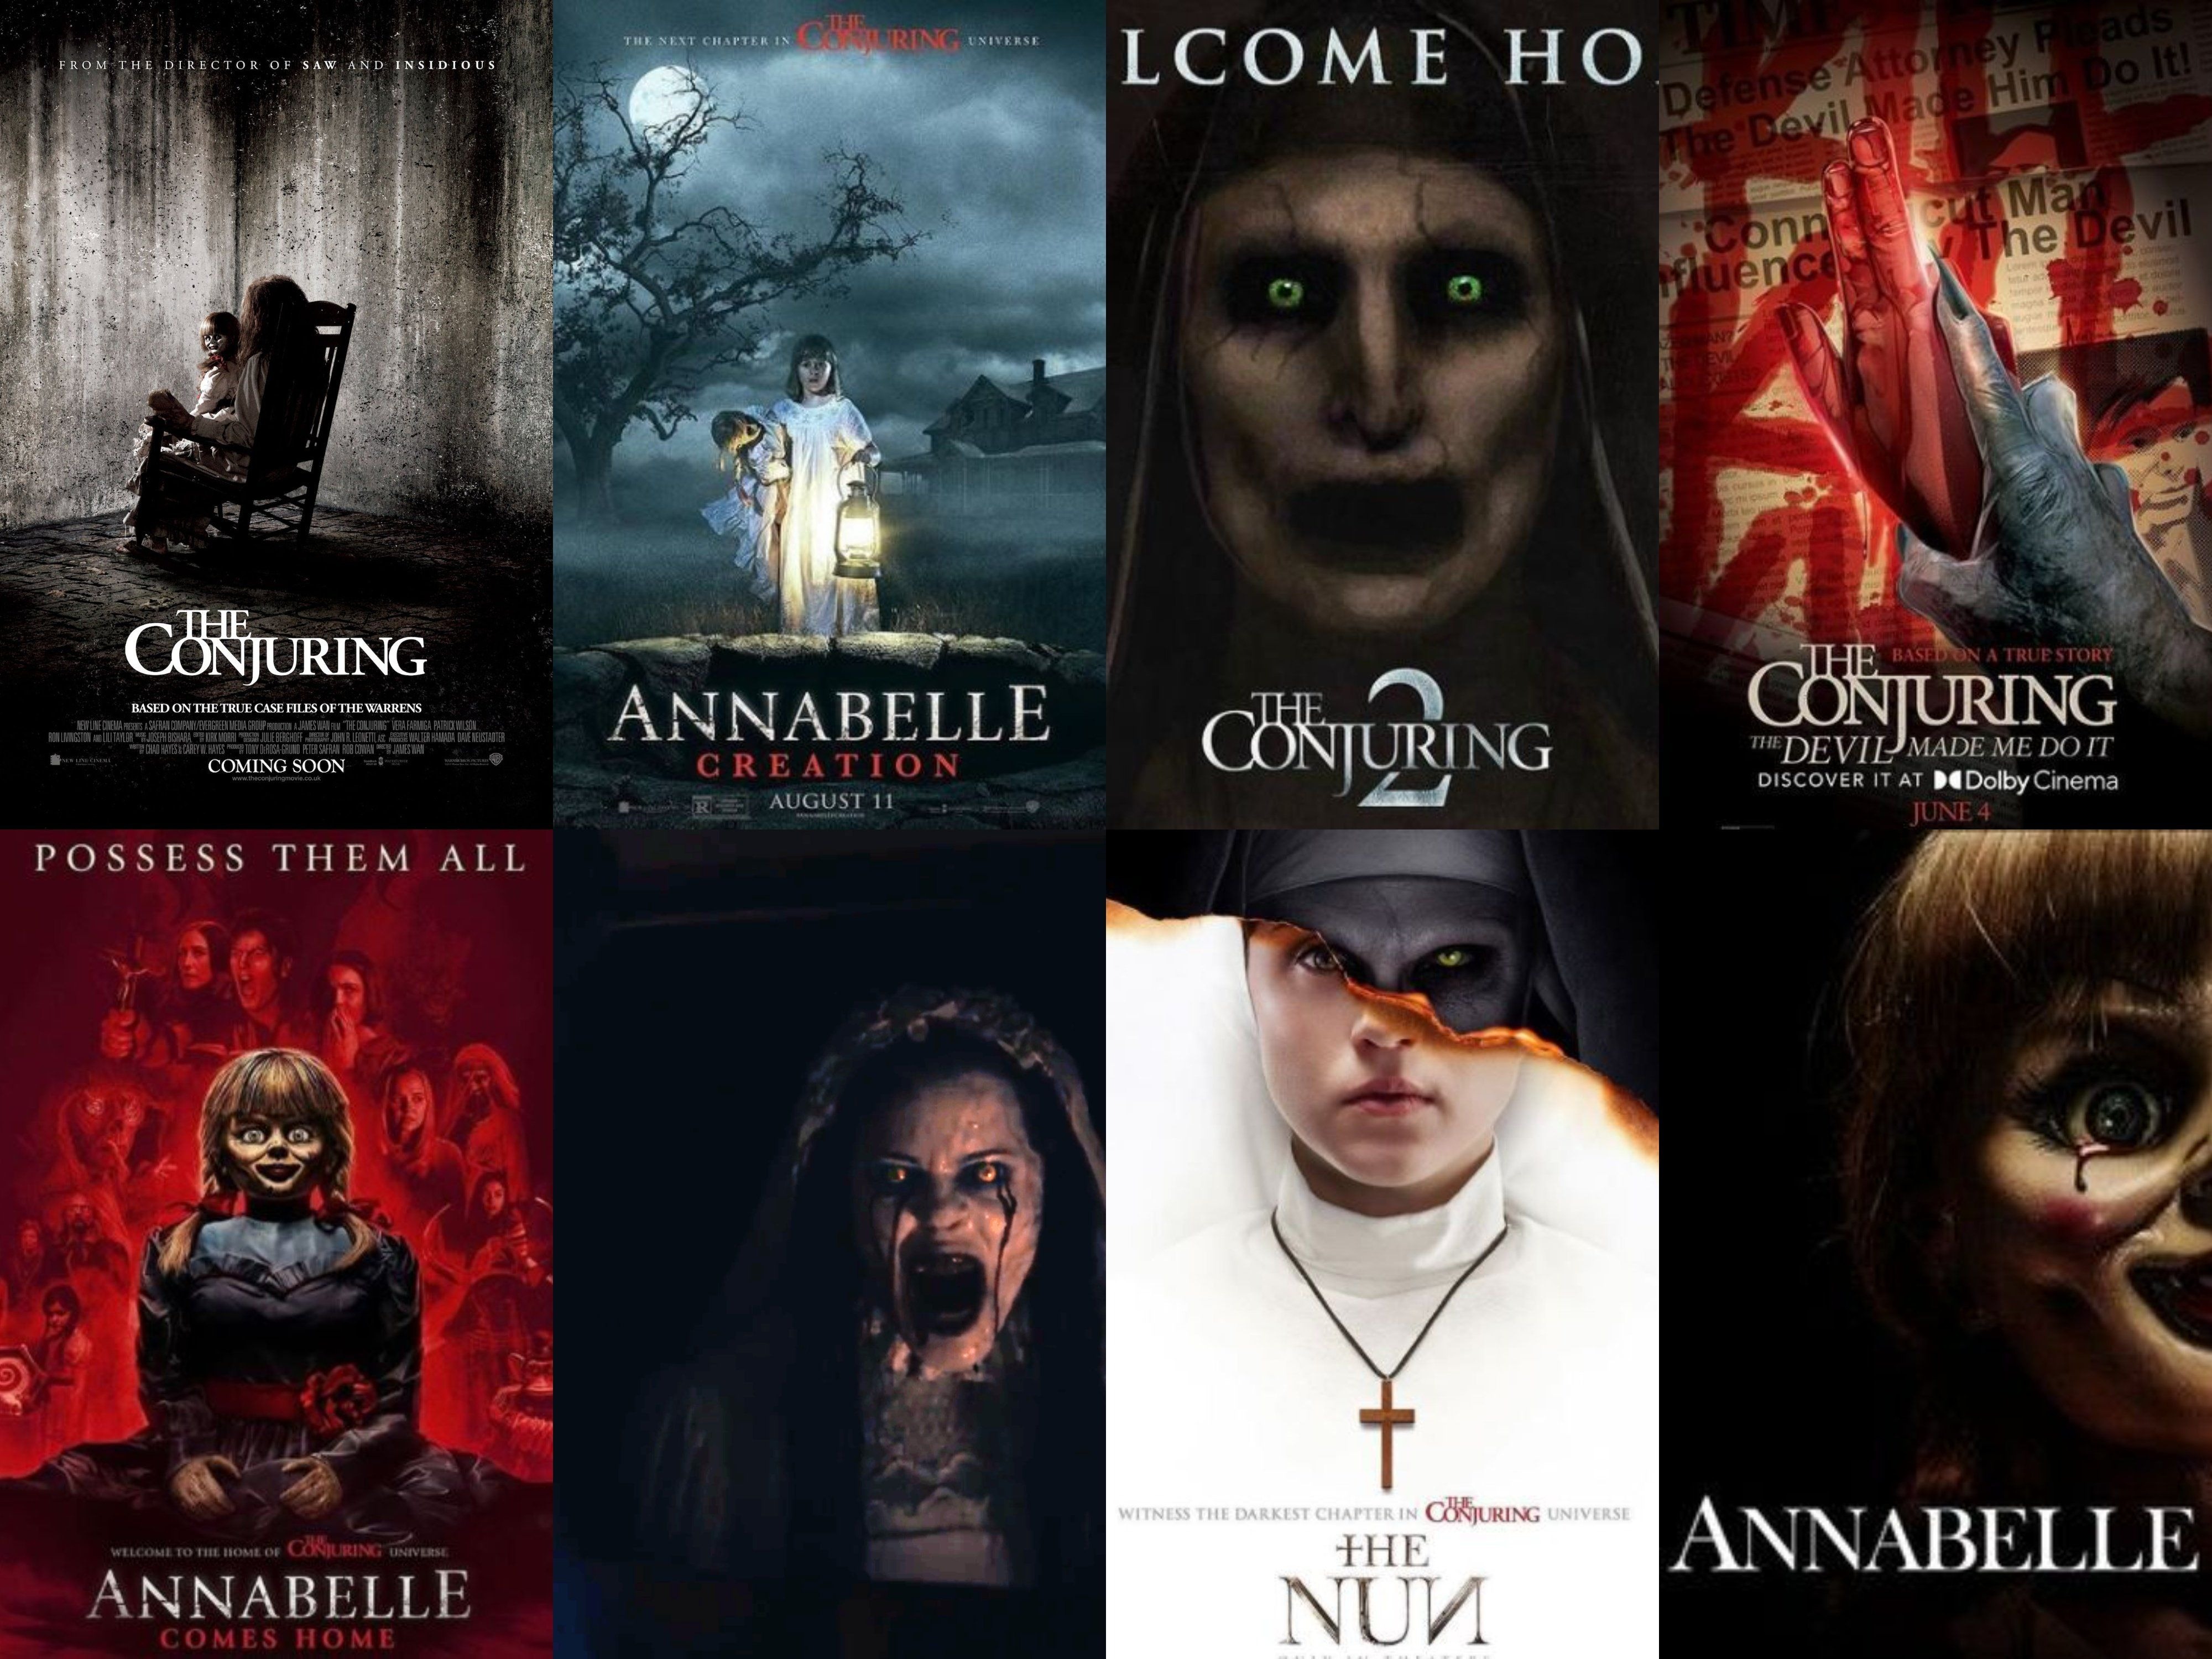 How To Watch The Conjuring In Order